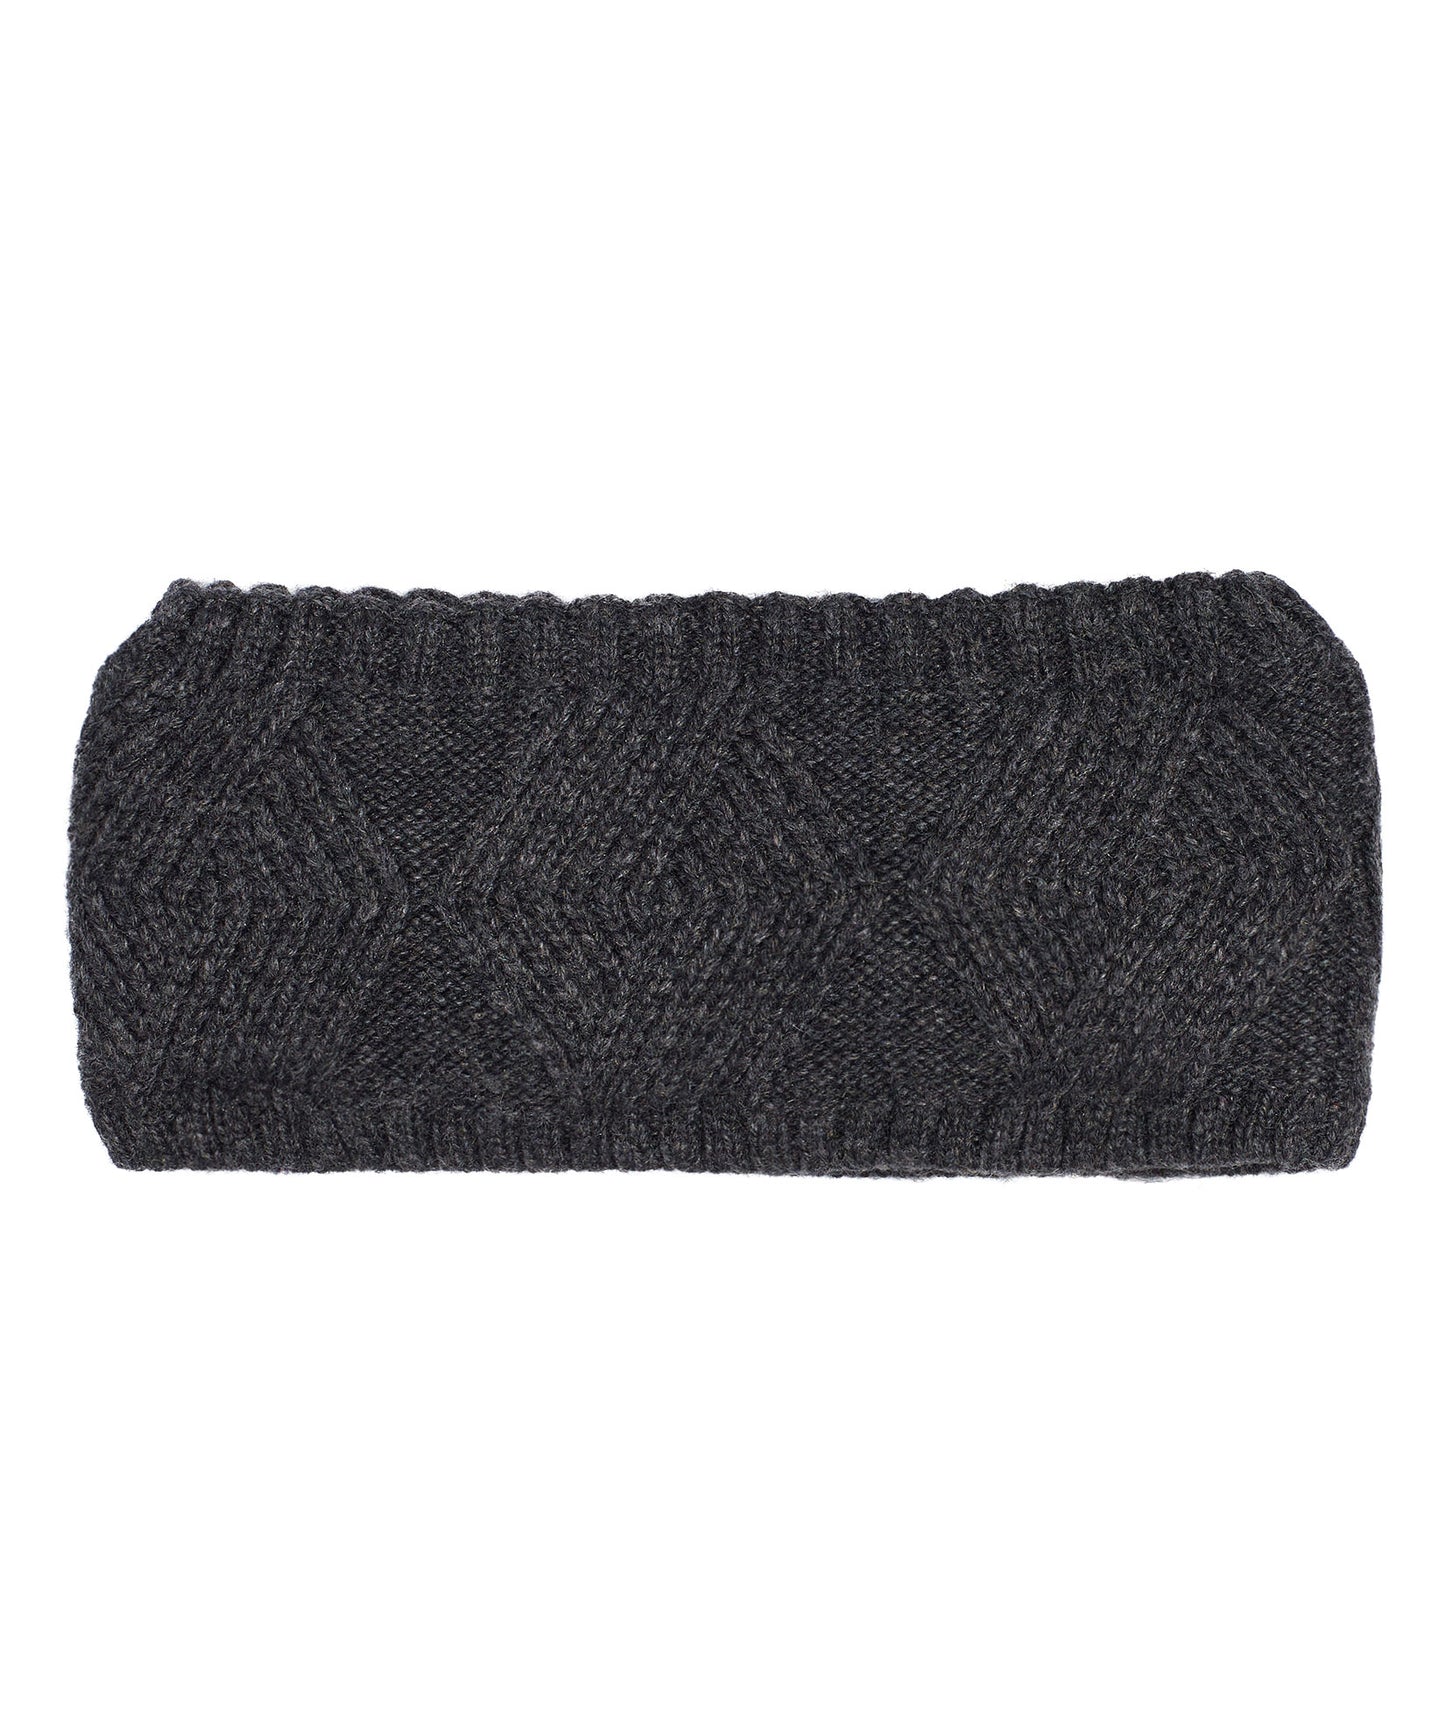 Recycled Cable Headband in color Charcoal